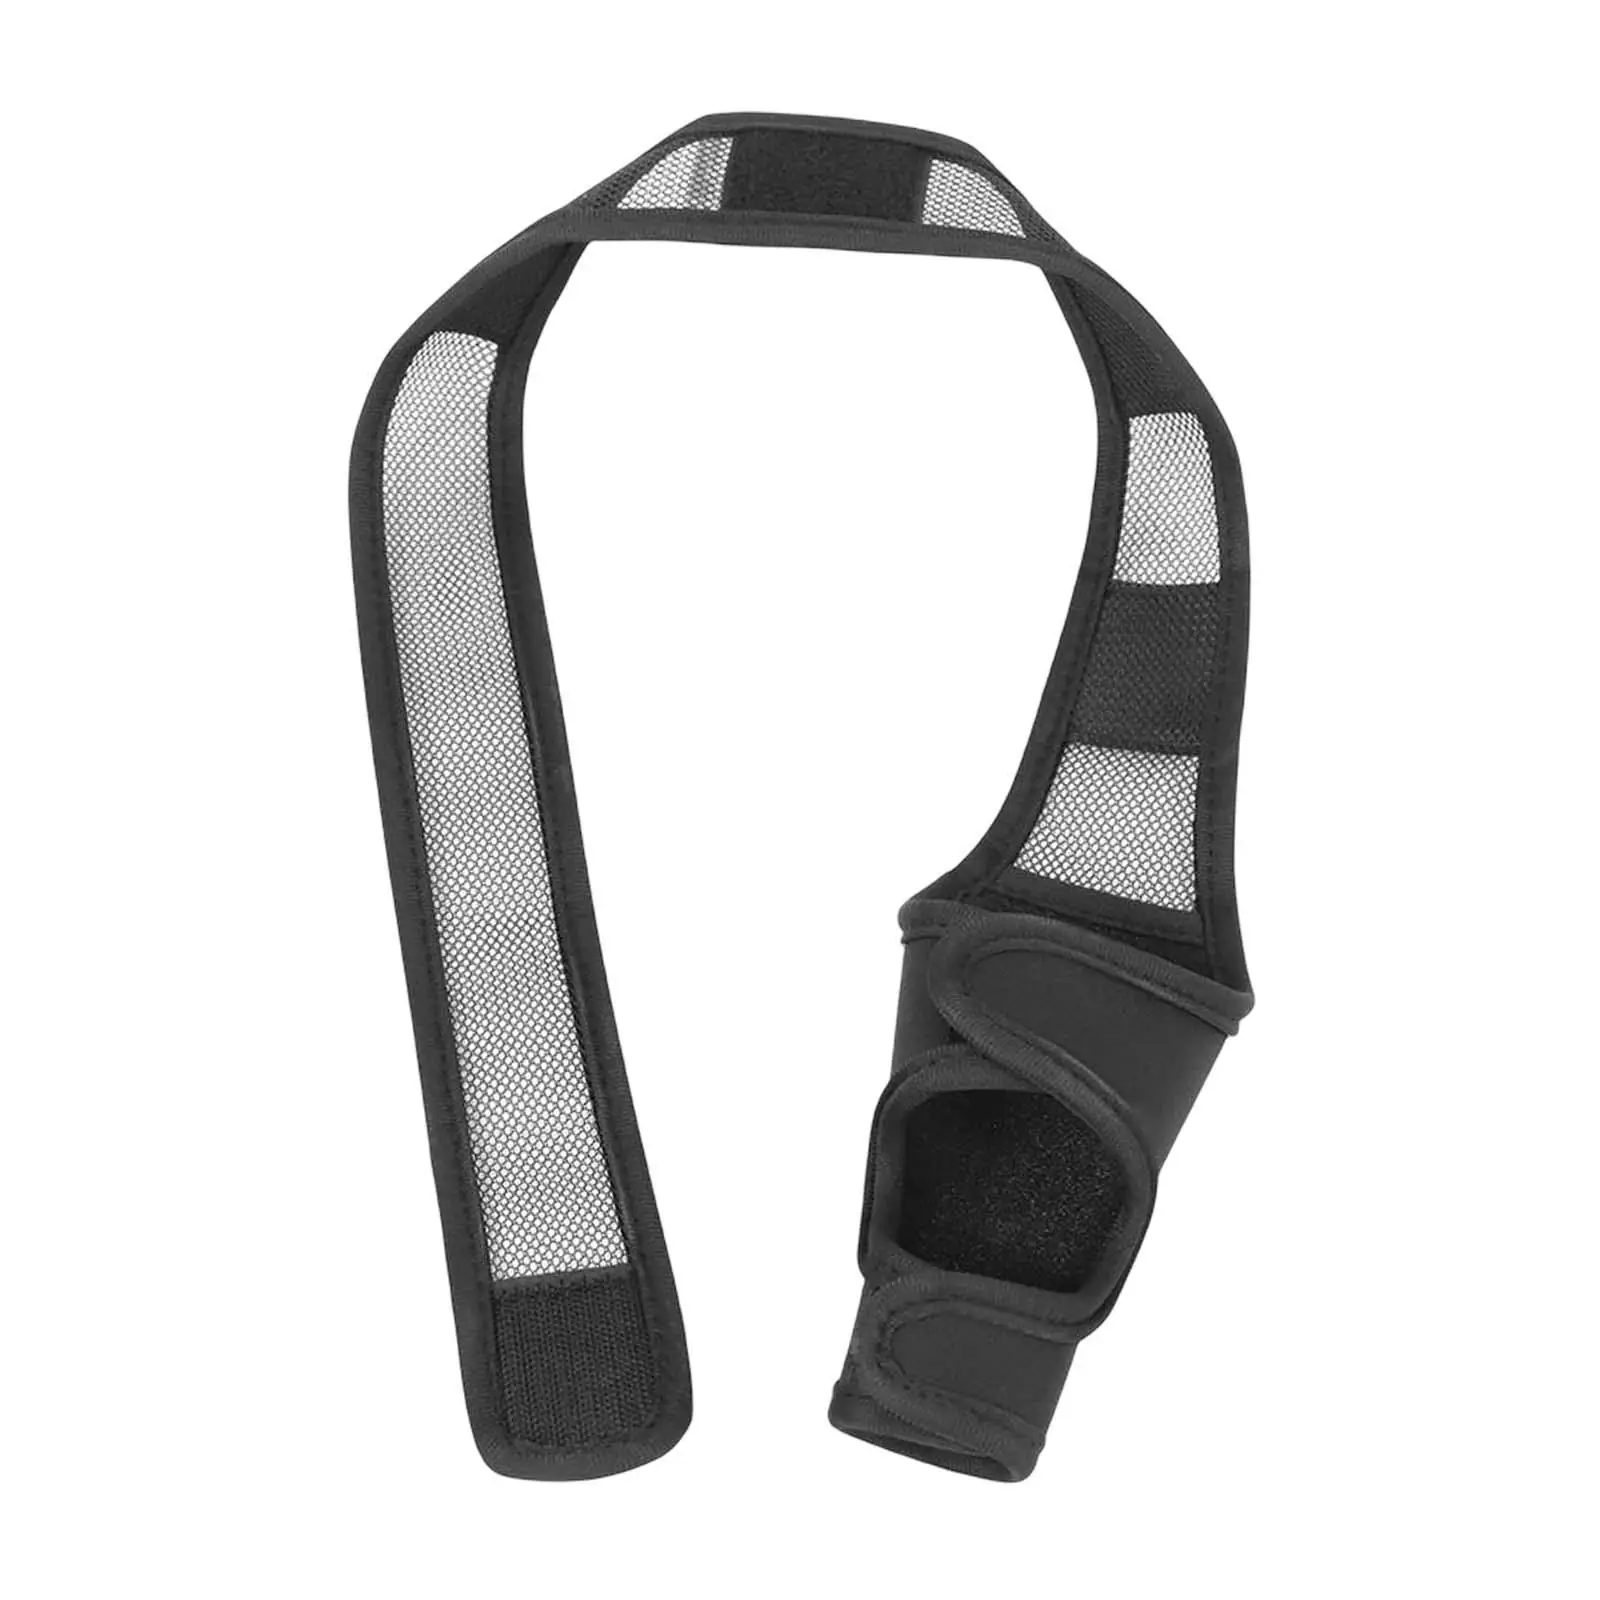 Joint Support Dog Knee Brace for Patella Dislocation Old, Disabled, Joint Injuries, Dogs